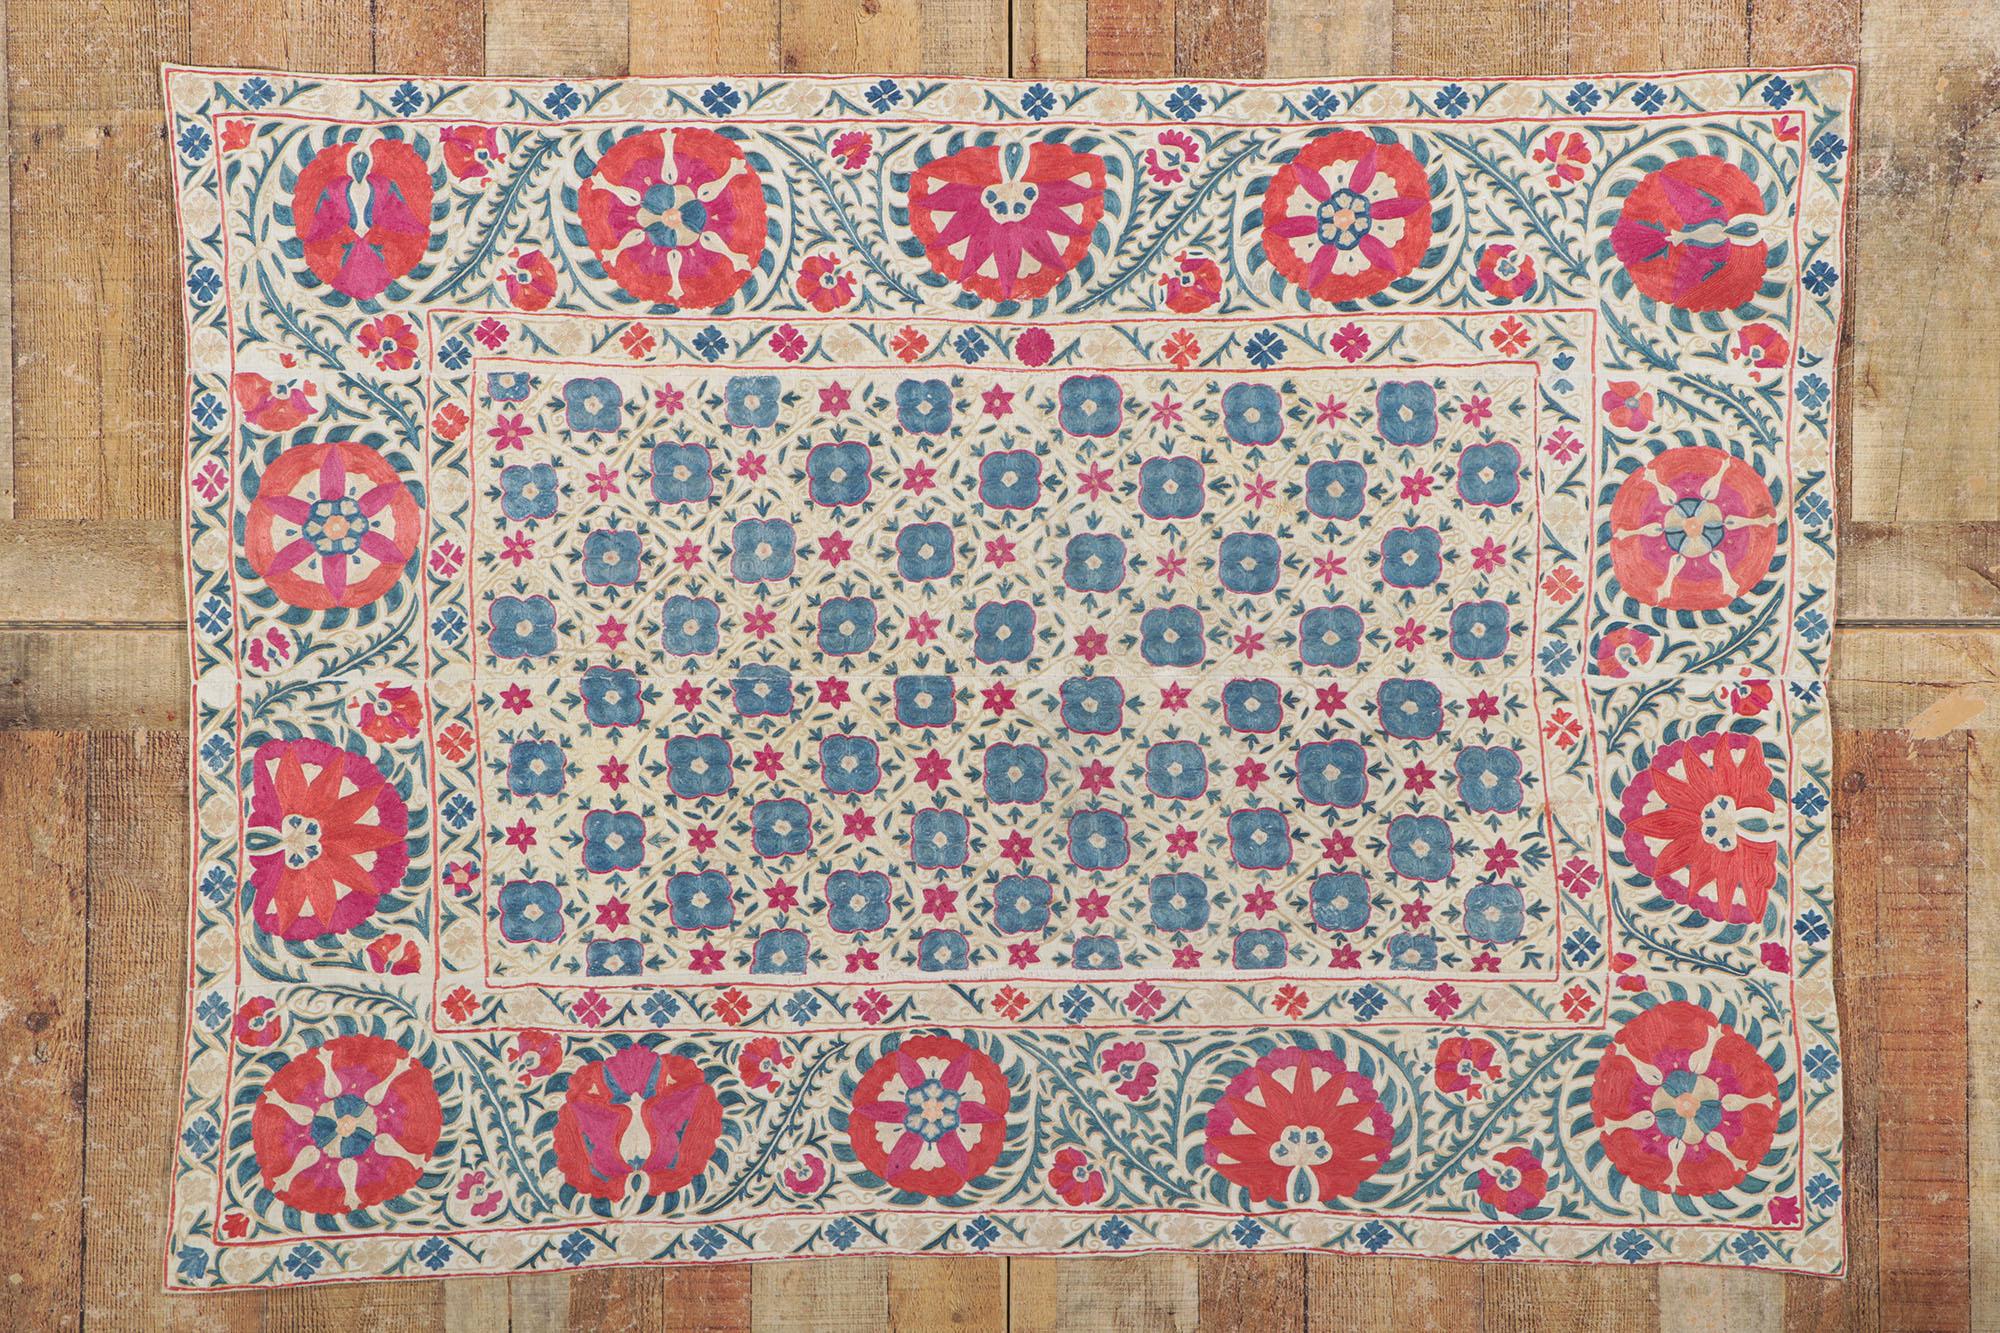 Antique Uzbekistan Suzani Tapestry Wall Hanging For Sale 3